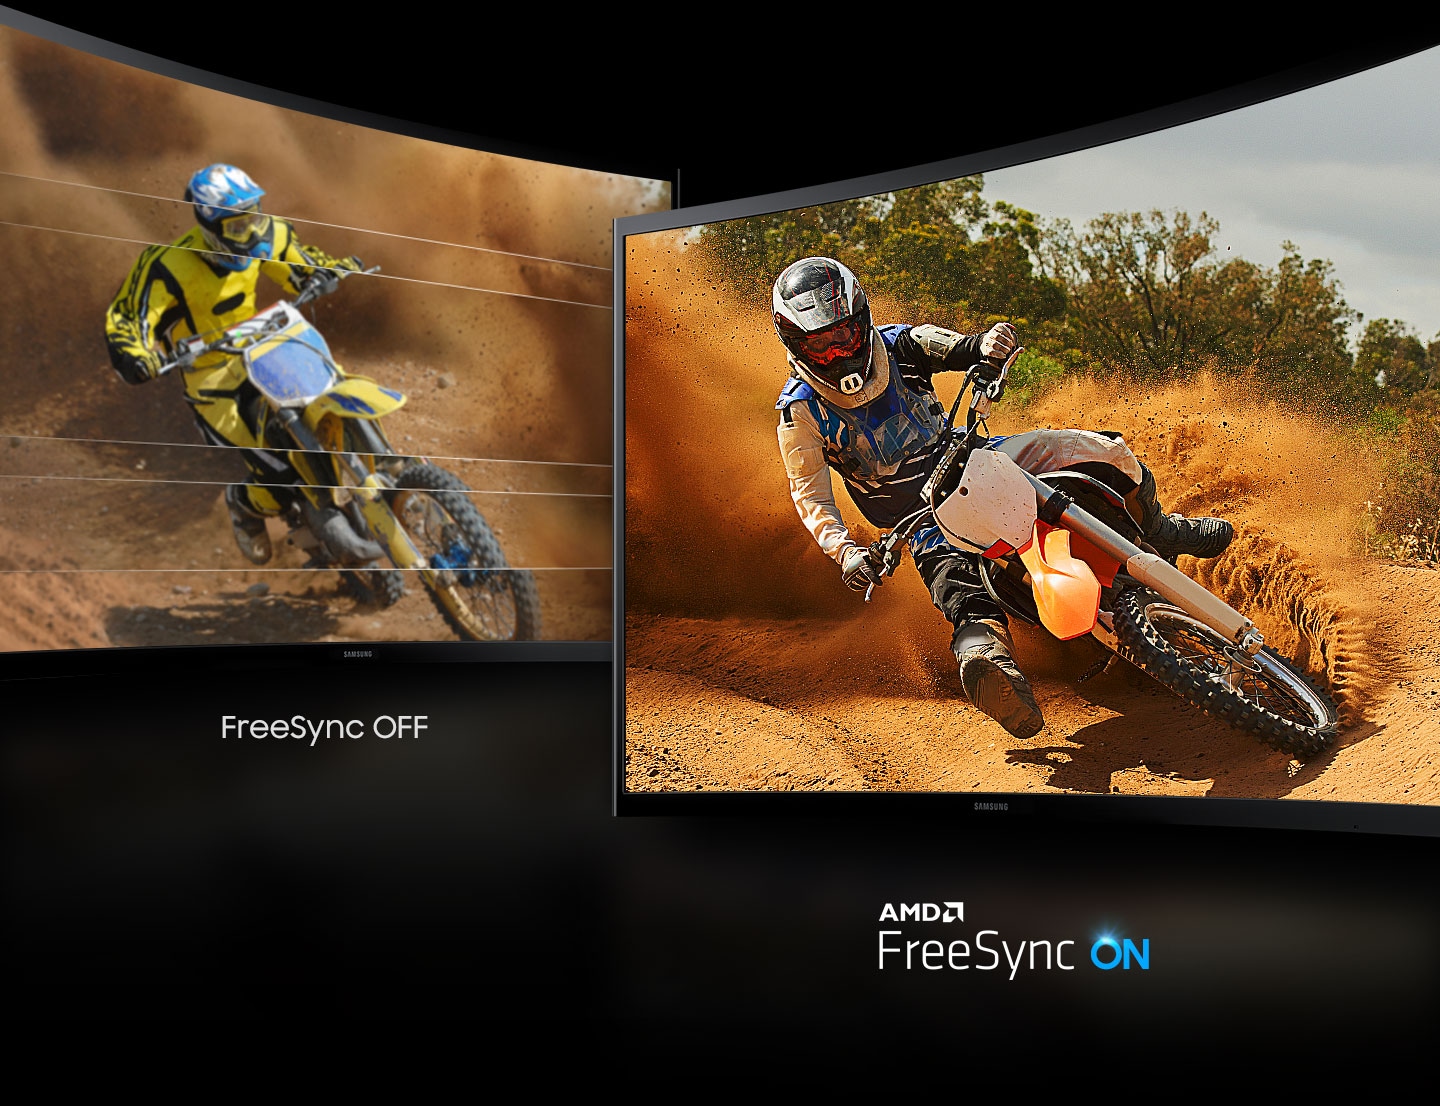 Comparison between FreeSync OFF and AMD FreeSync On. FreeSync OFF causes tearing in the image of the rider on the monitor, but the image of the rider on the AMD FreeSync monitor is clearly visible without obstruction.